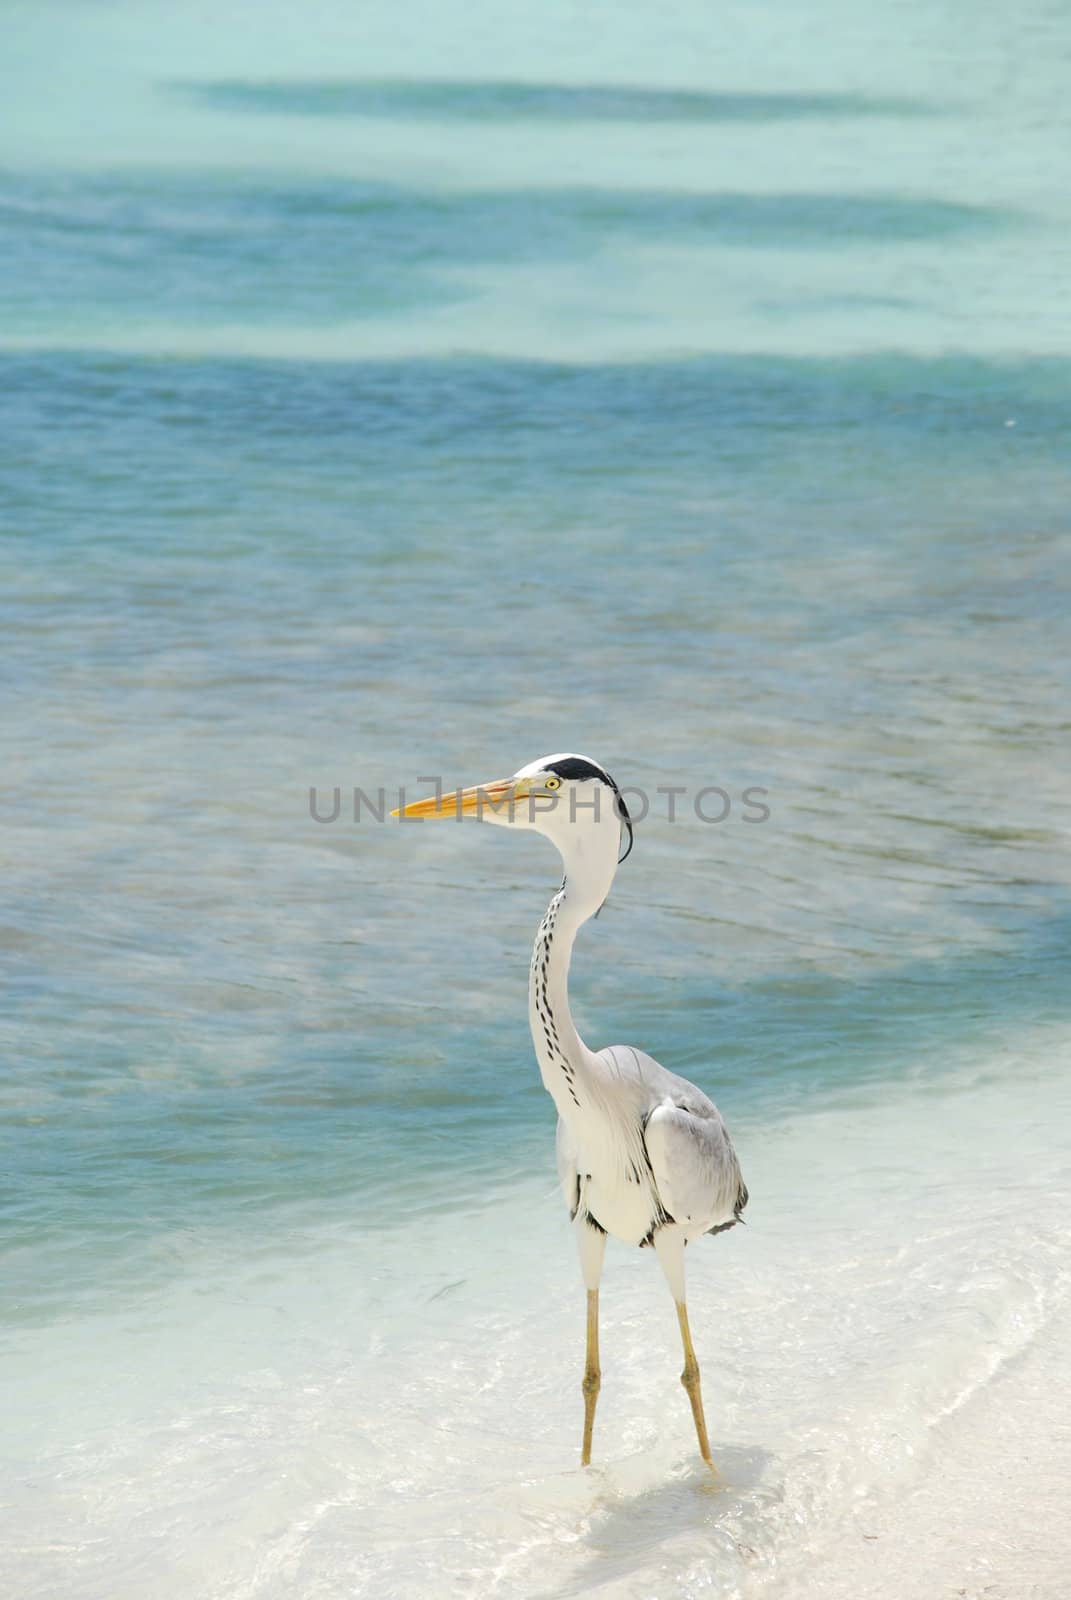 photo of a Heron with sea background on a maldivian island